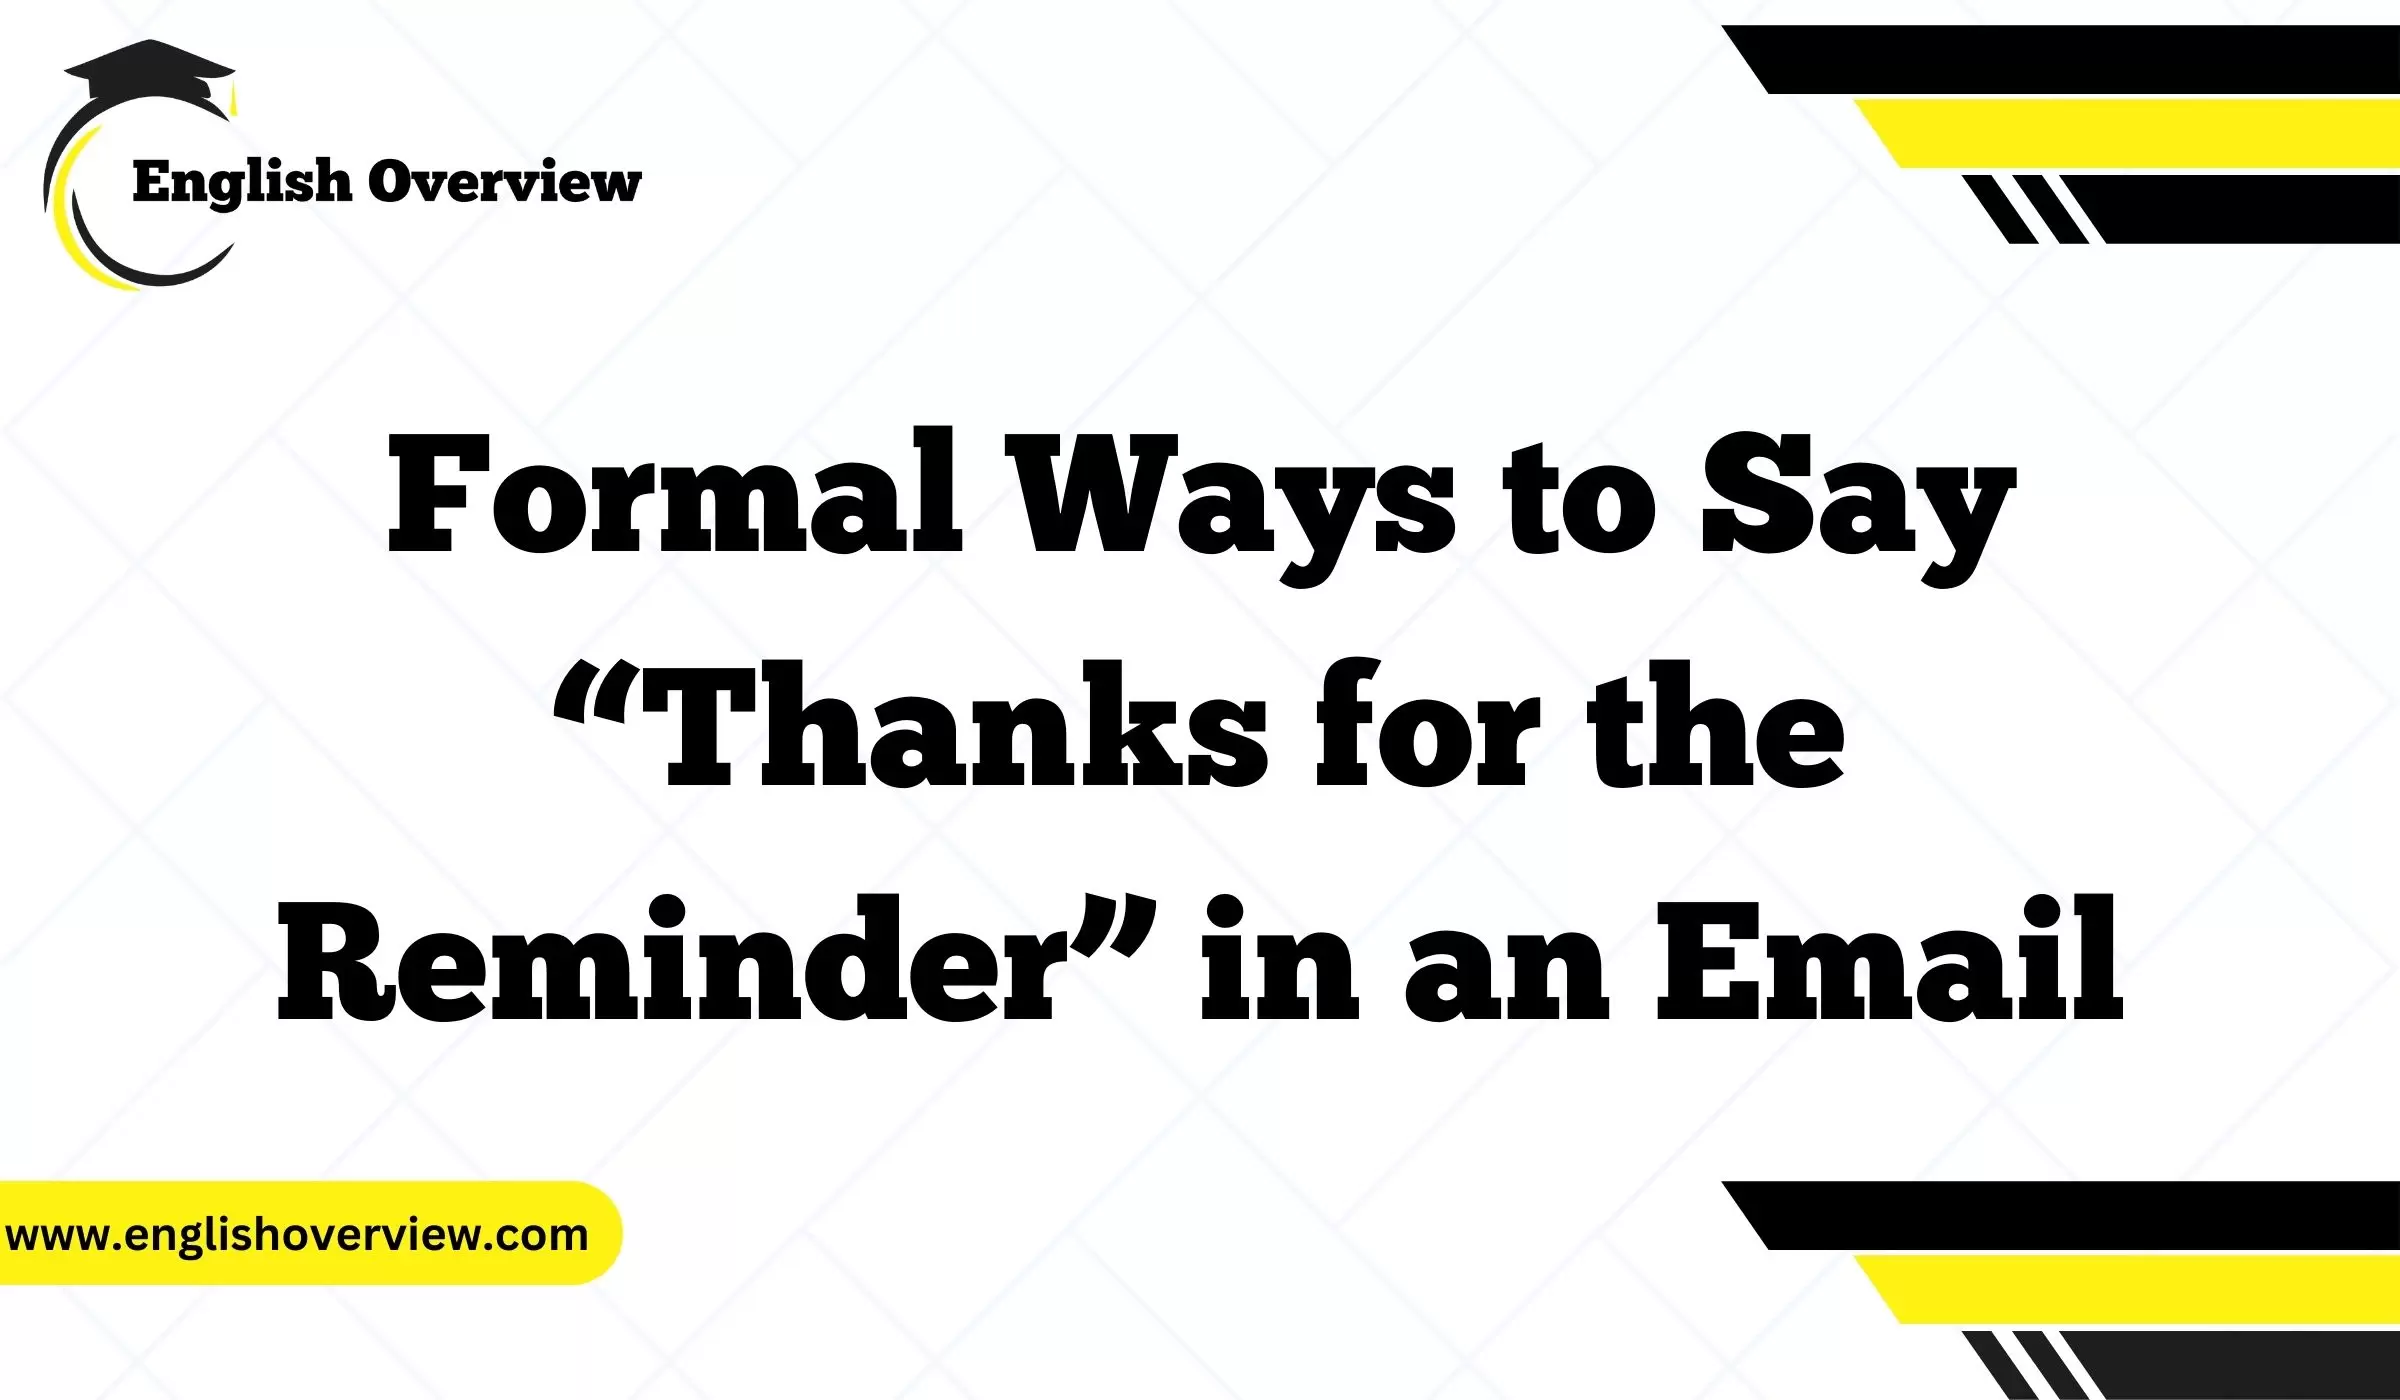 Formal Ways to Say “Thanks for the Reminder” in an Email